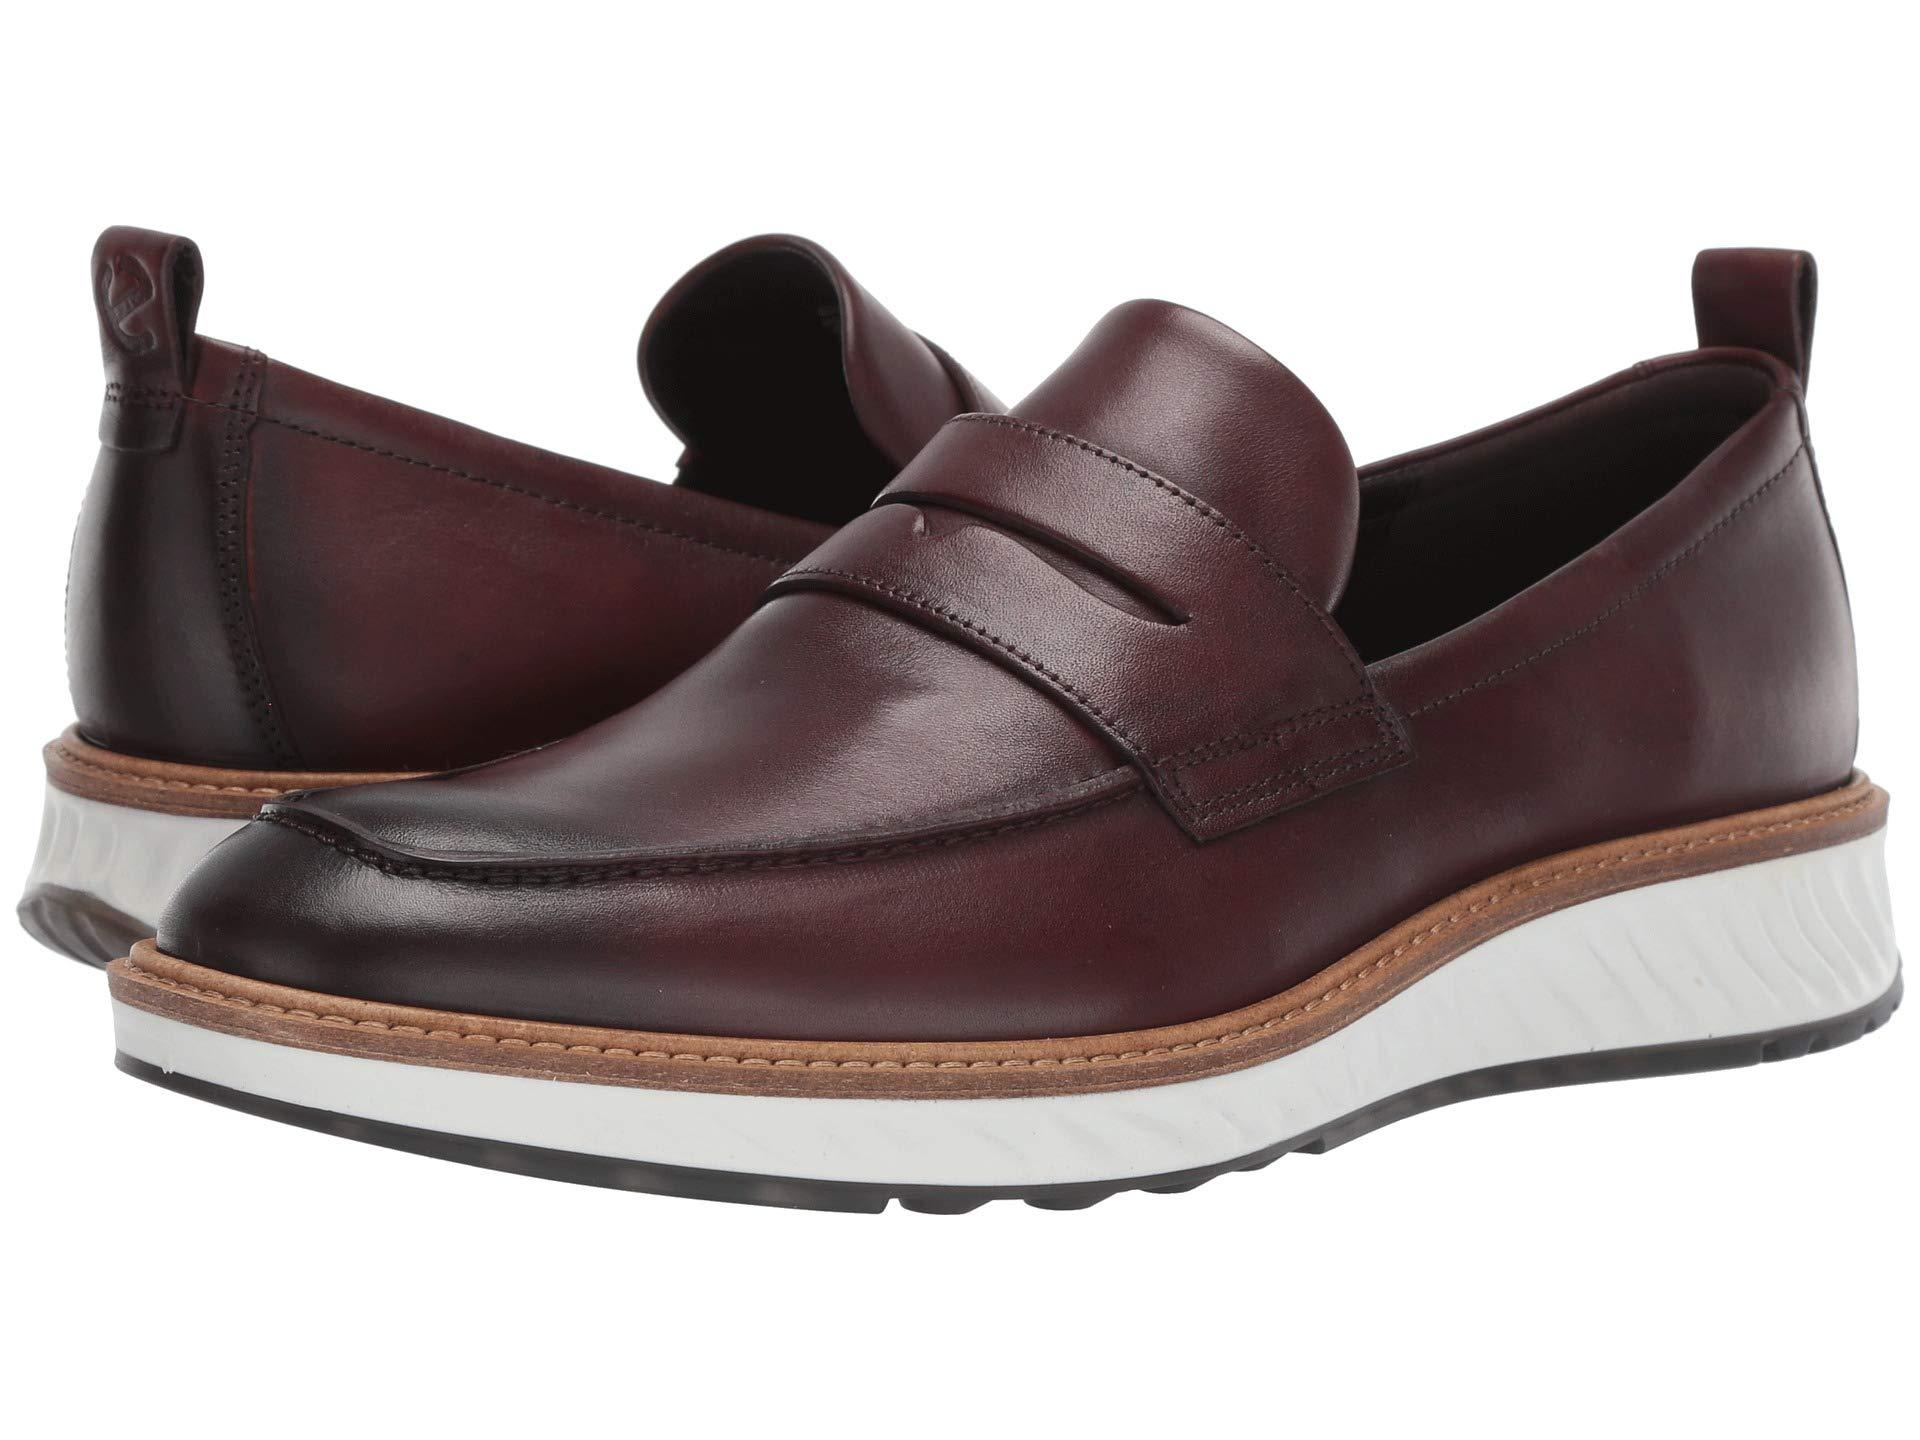 Ecco Leather St1 Hybrid Penny Loafer in Tan (Brown) for Men - Lyst